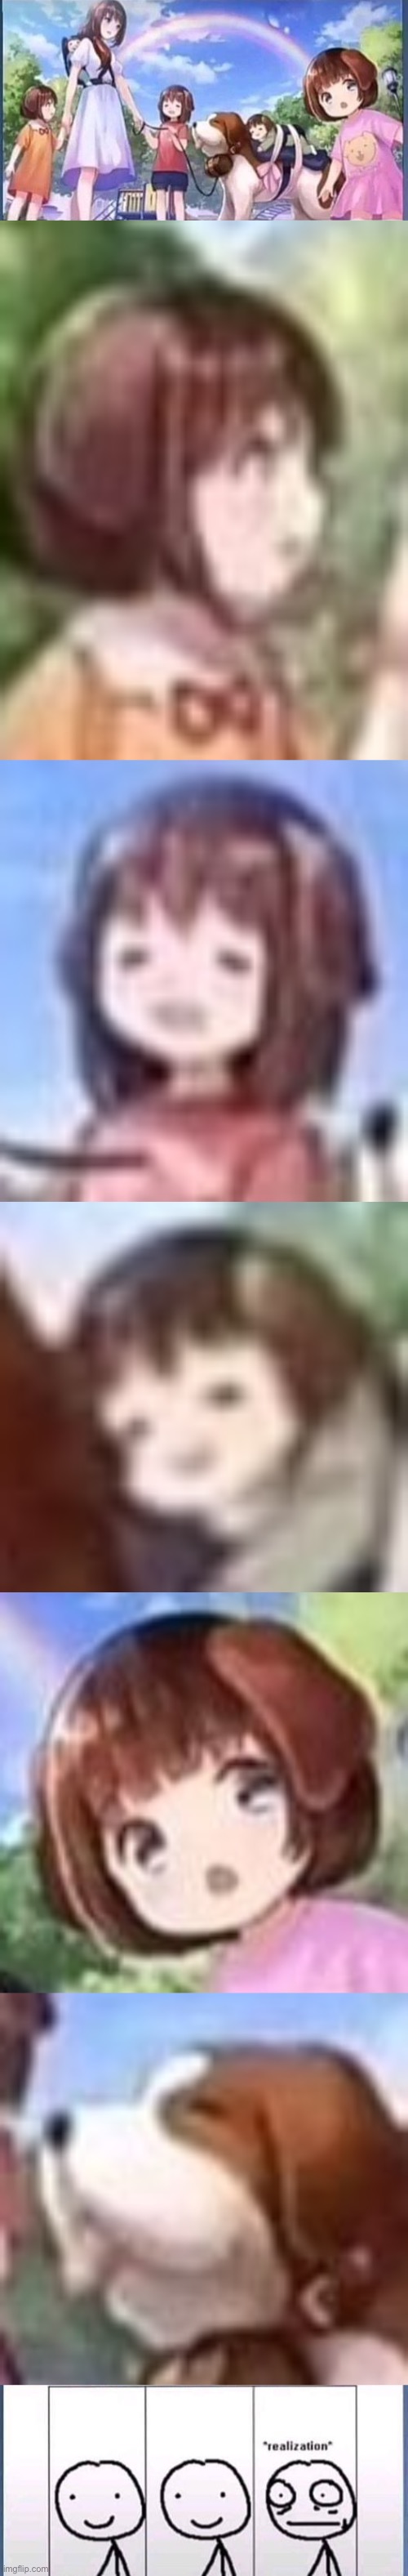 y tho | image tagged in anime dog children,realization,anime,y tho,why tho,but why tho | made w/ Imgflip meme maker